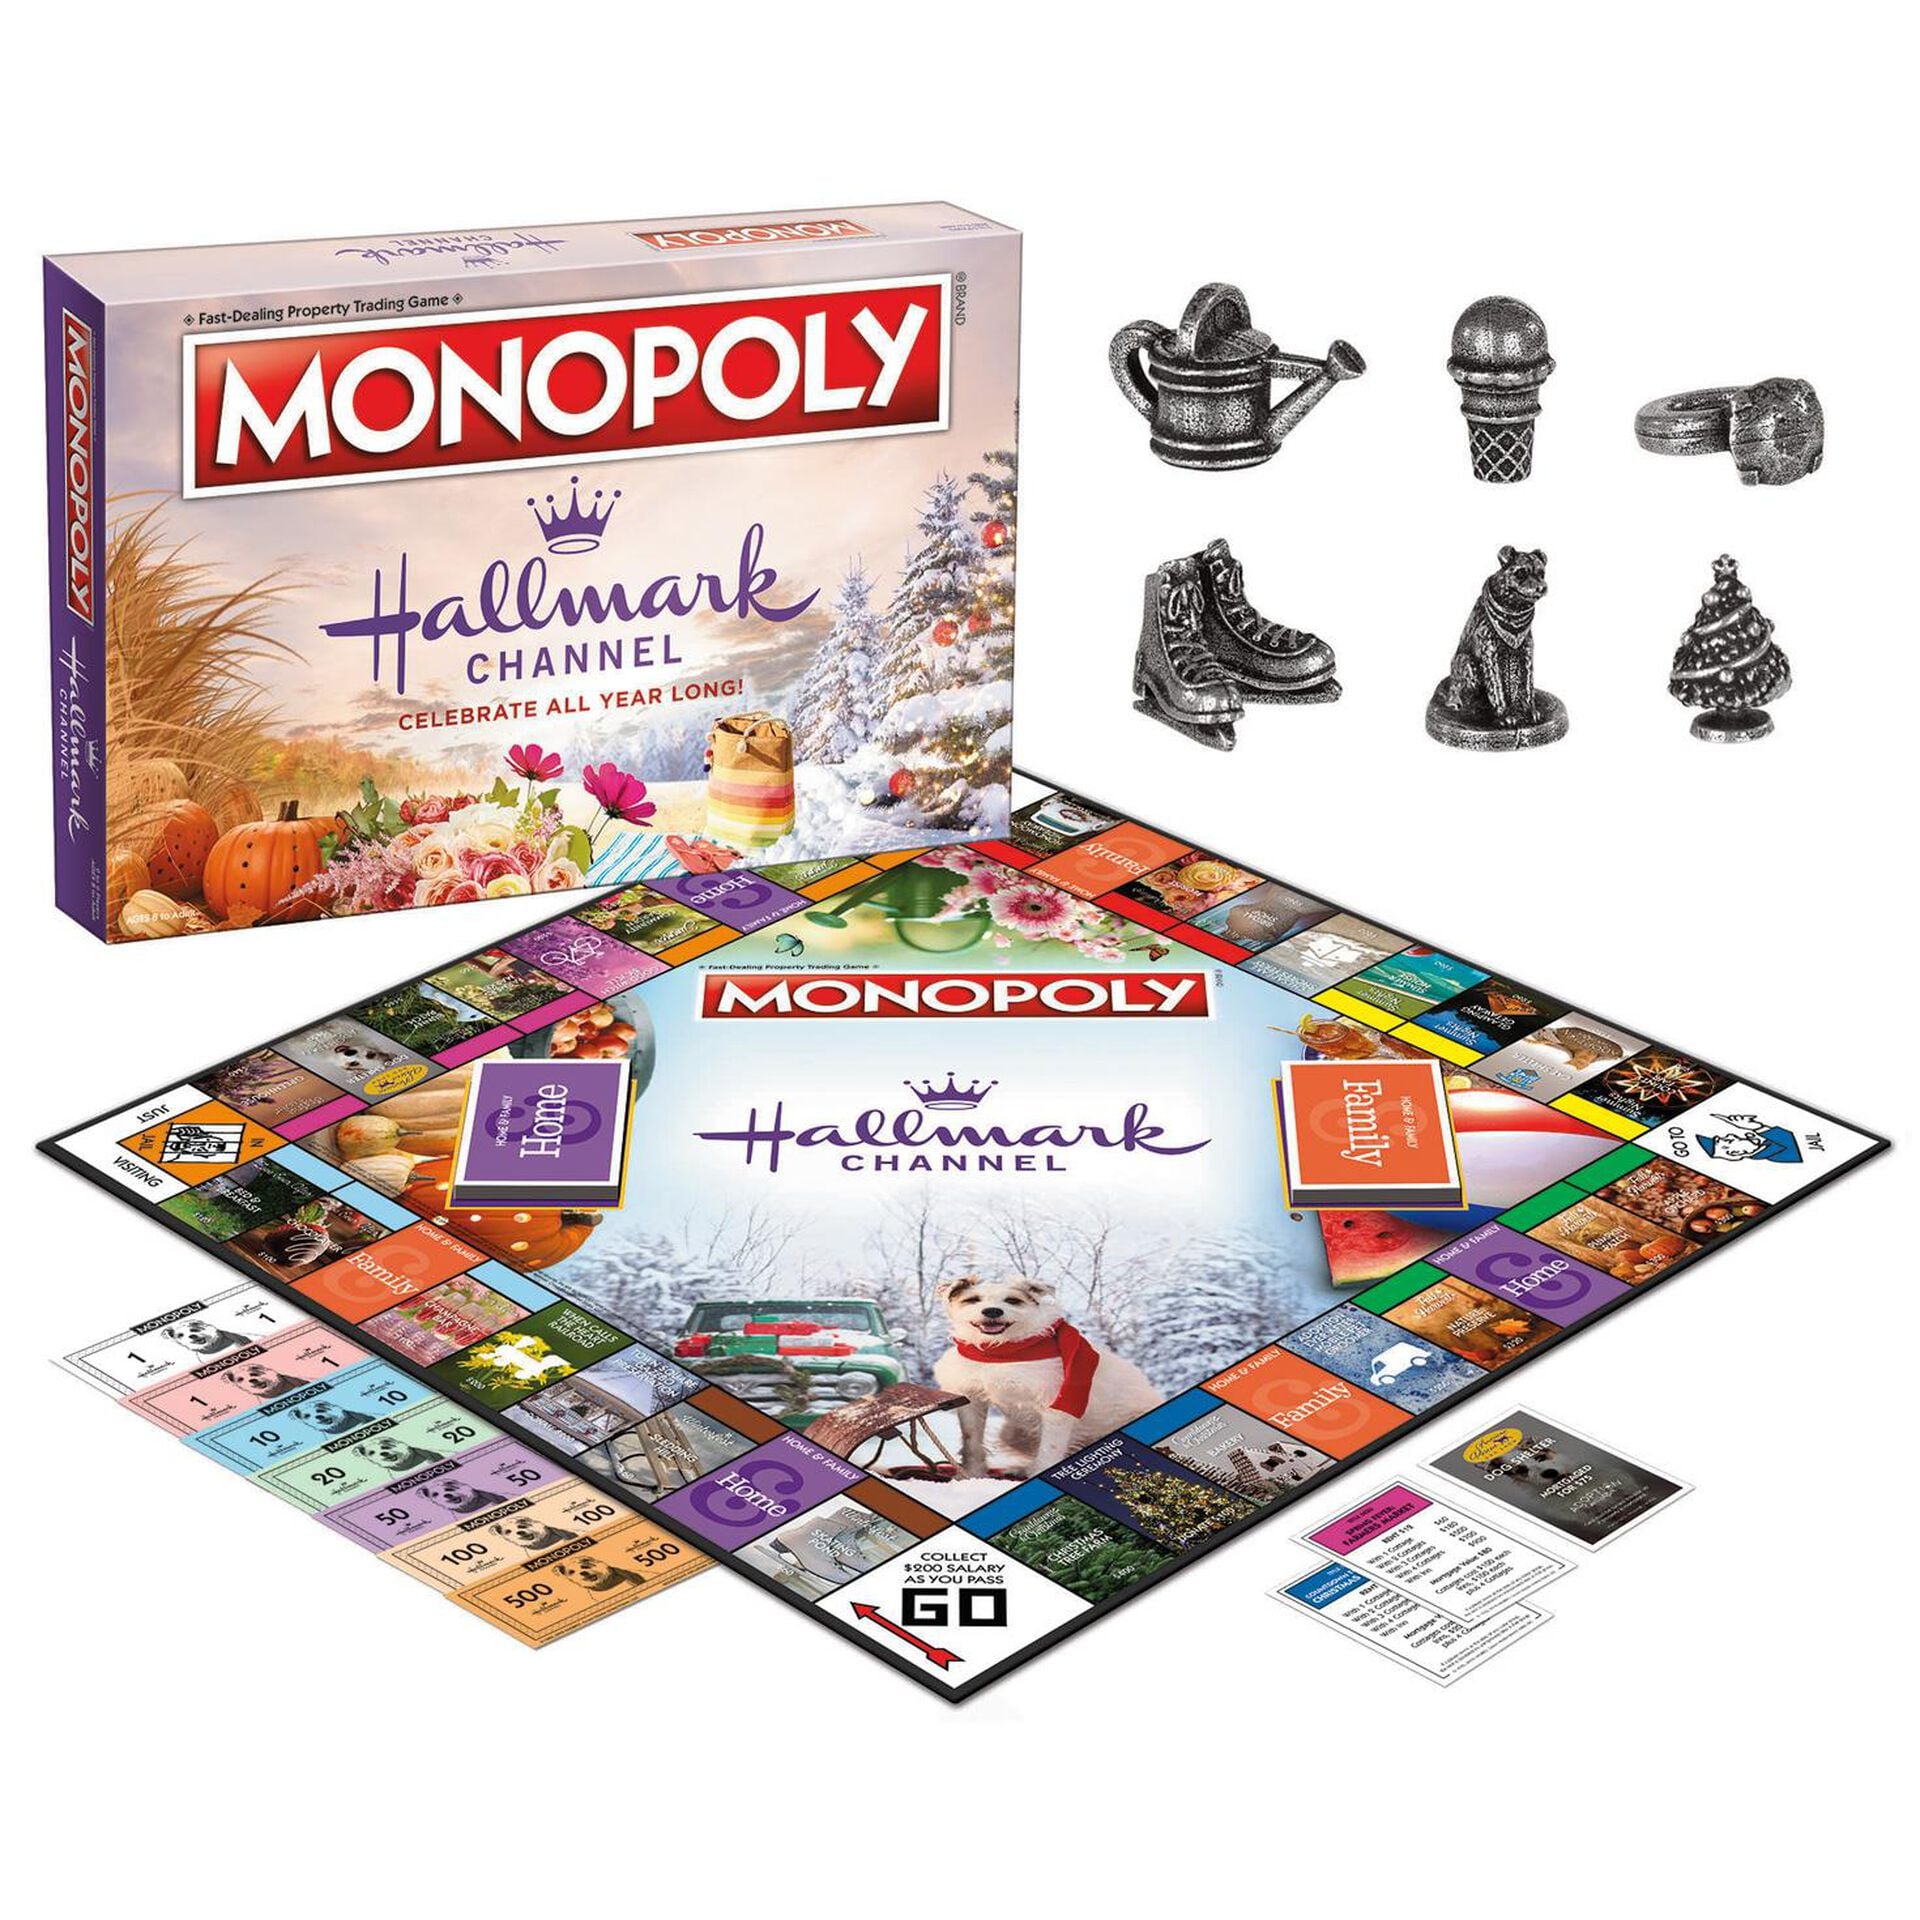 LIST: 12 limited-edition Monopoly games that are perfect for